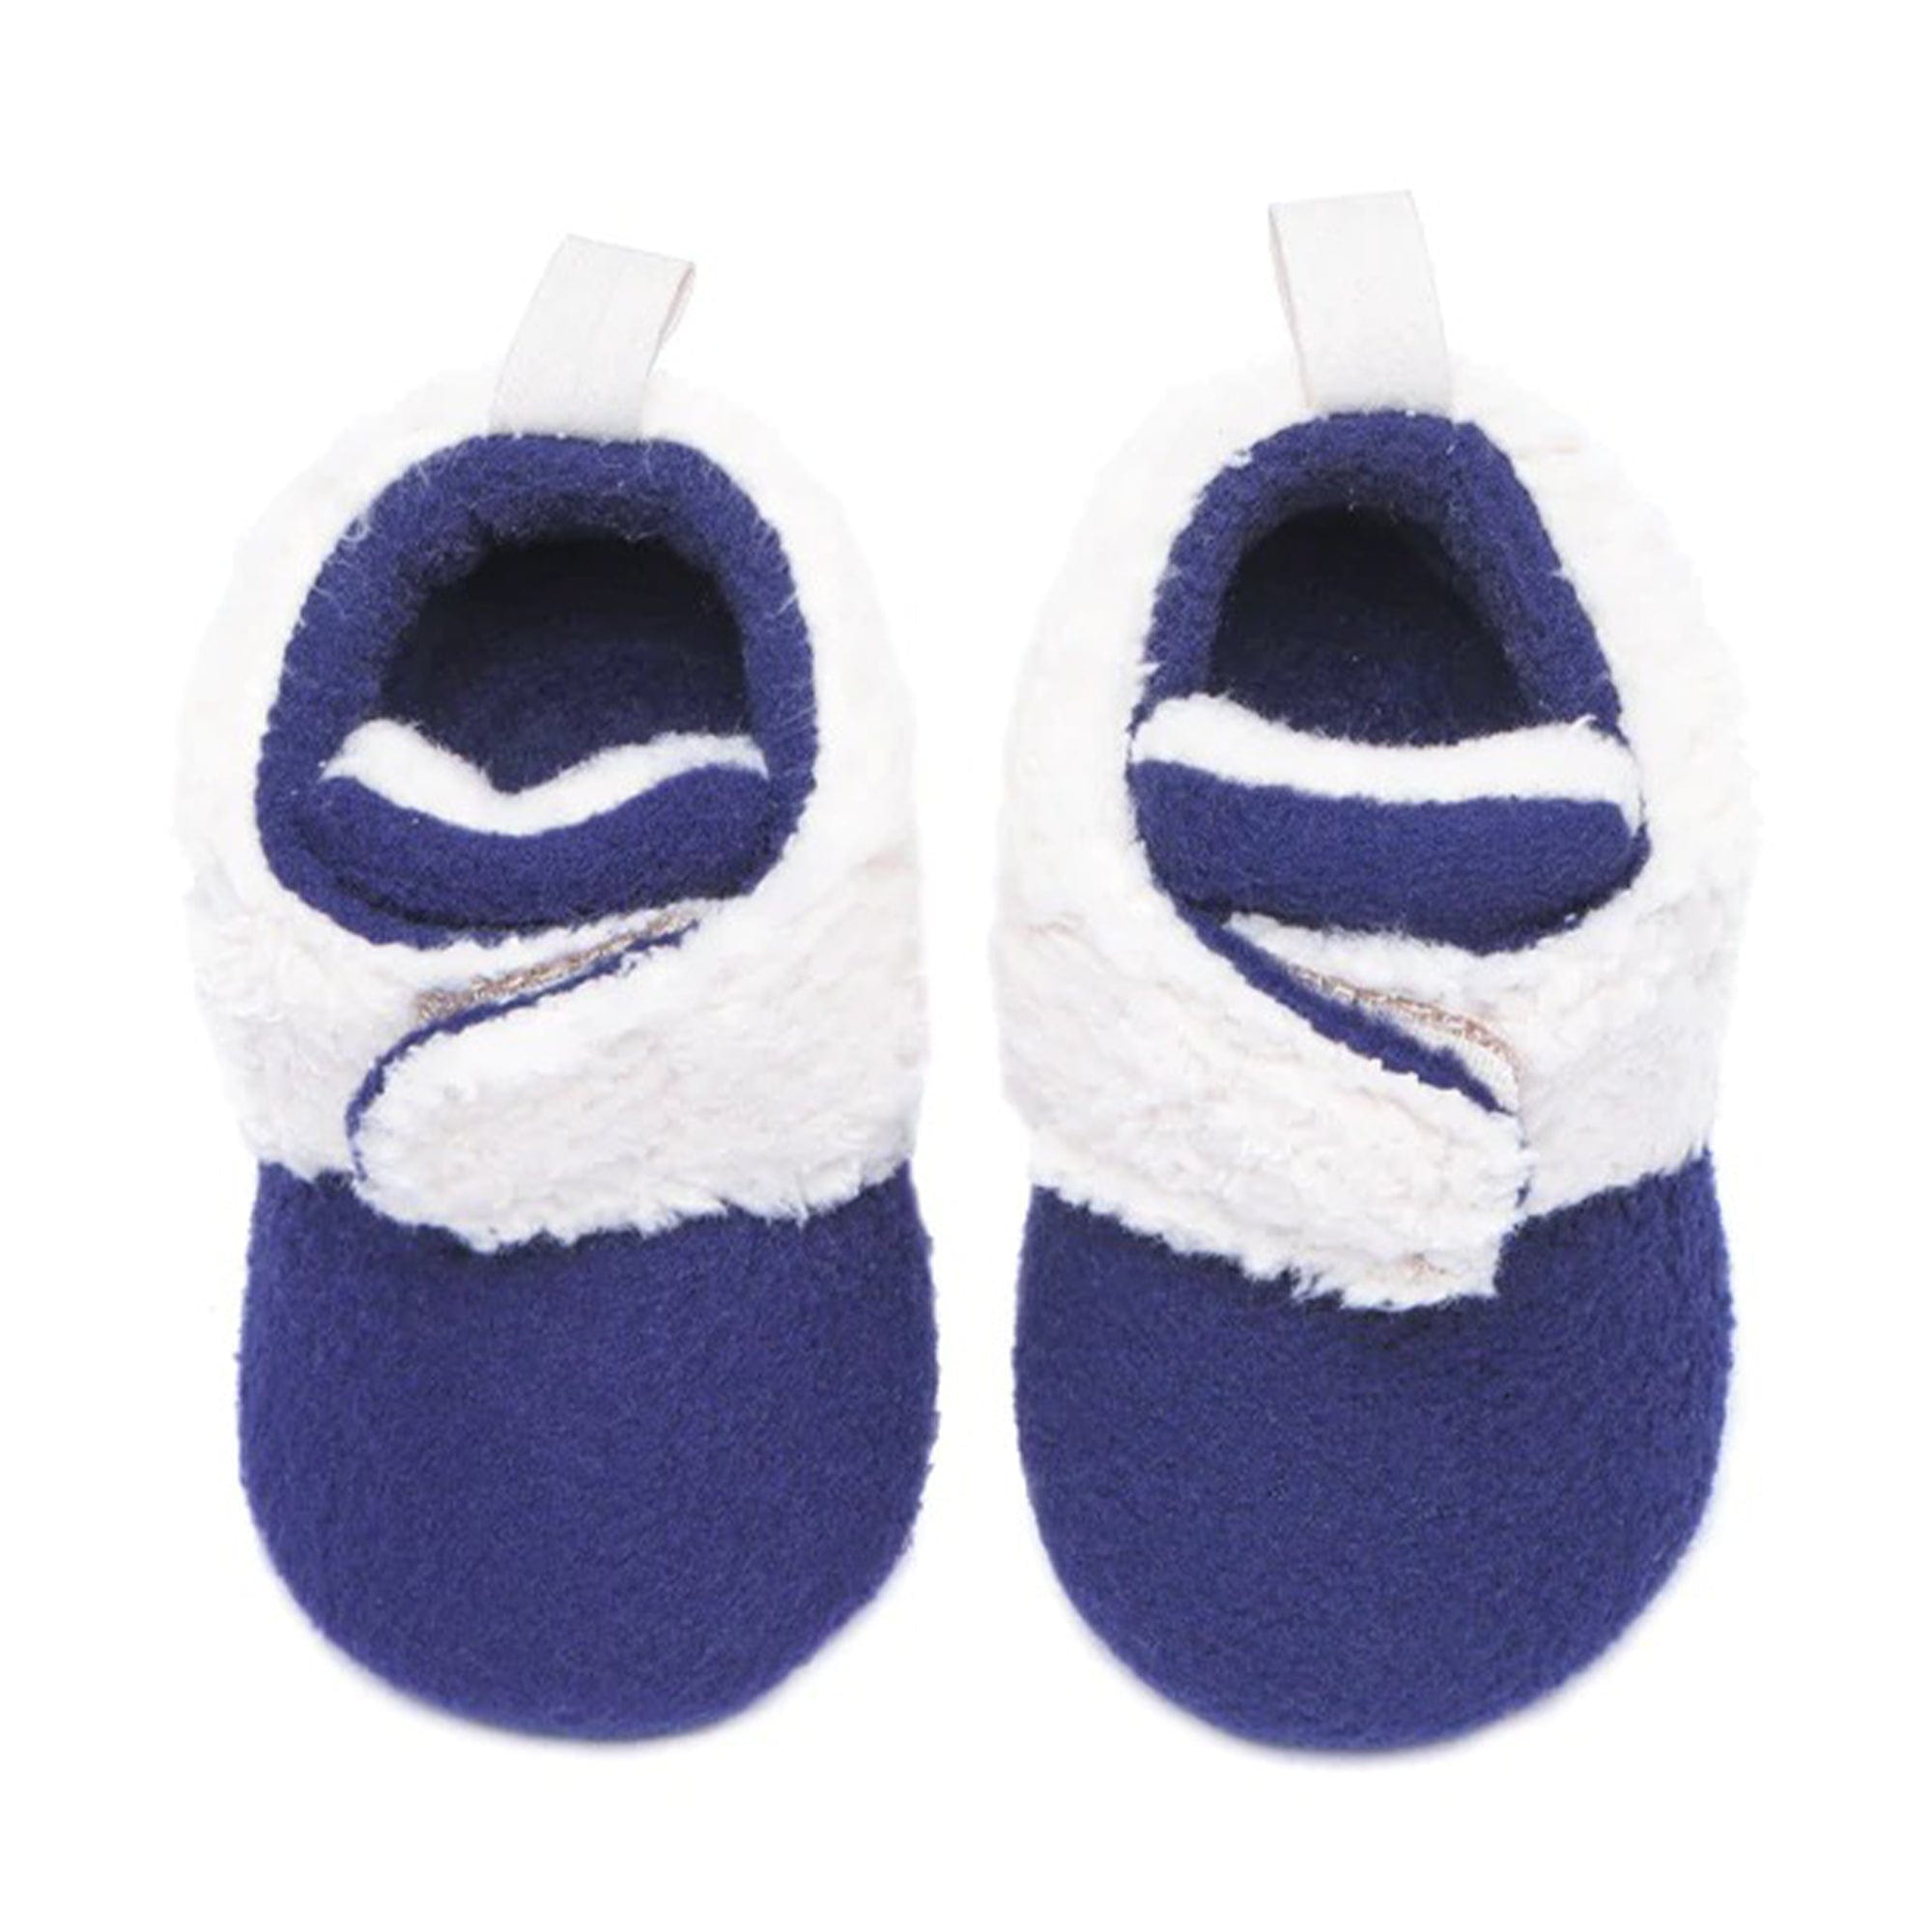 Baby Infants Shearling Booties